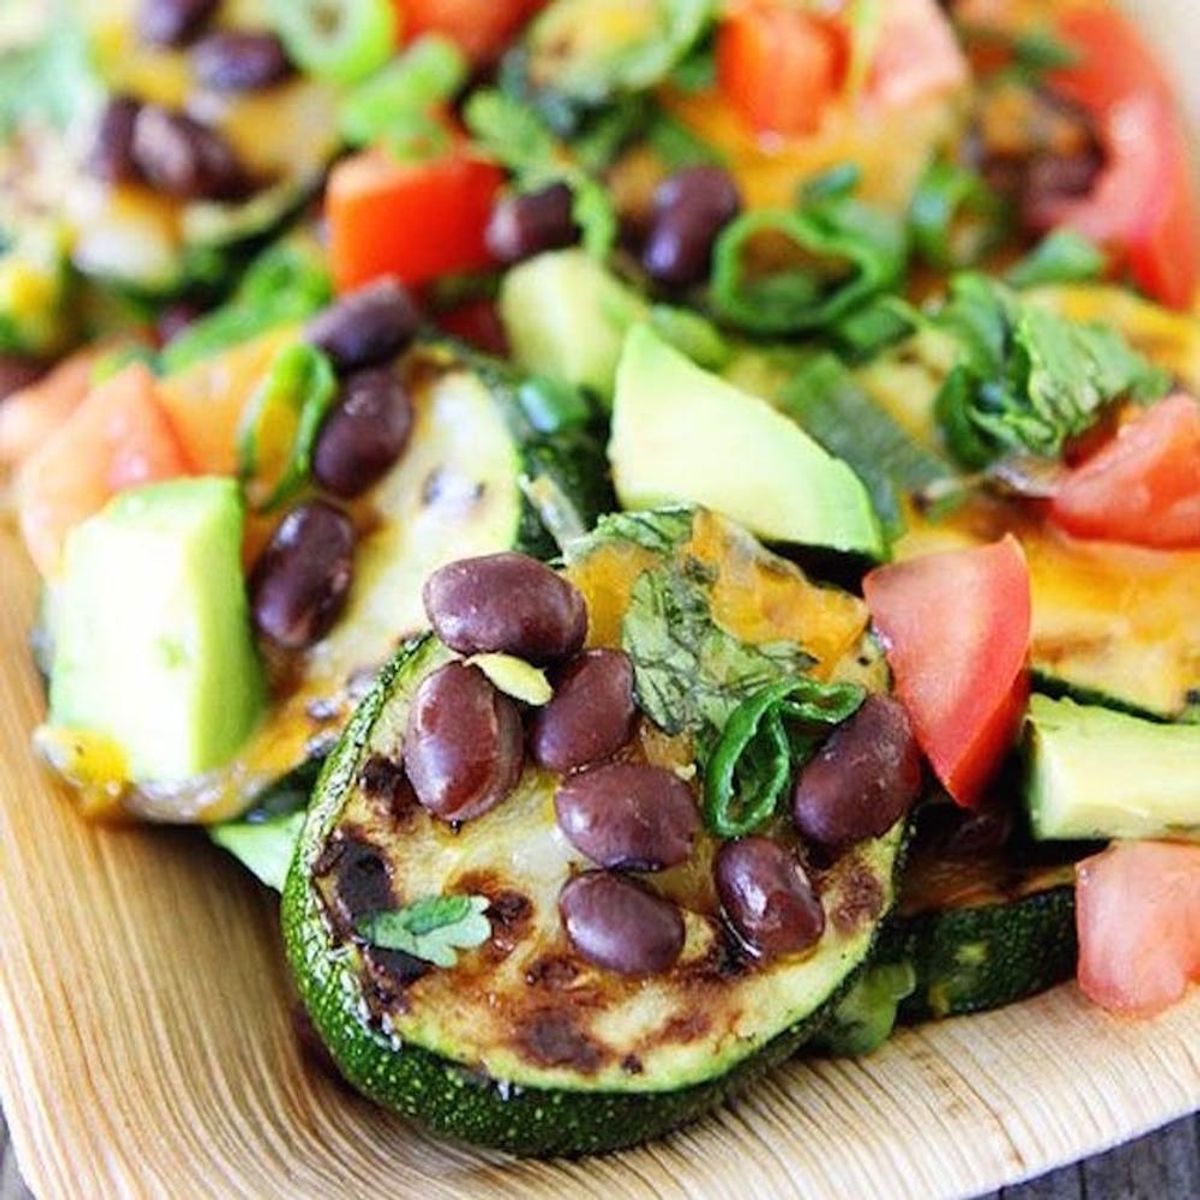 10 Tasty Plant-Based Snacks to Power You Through Your Day